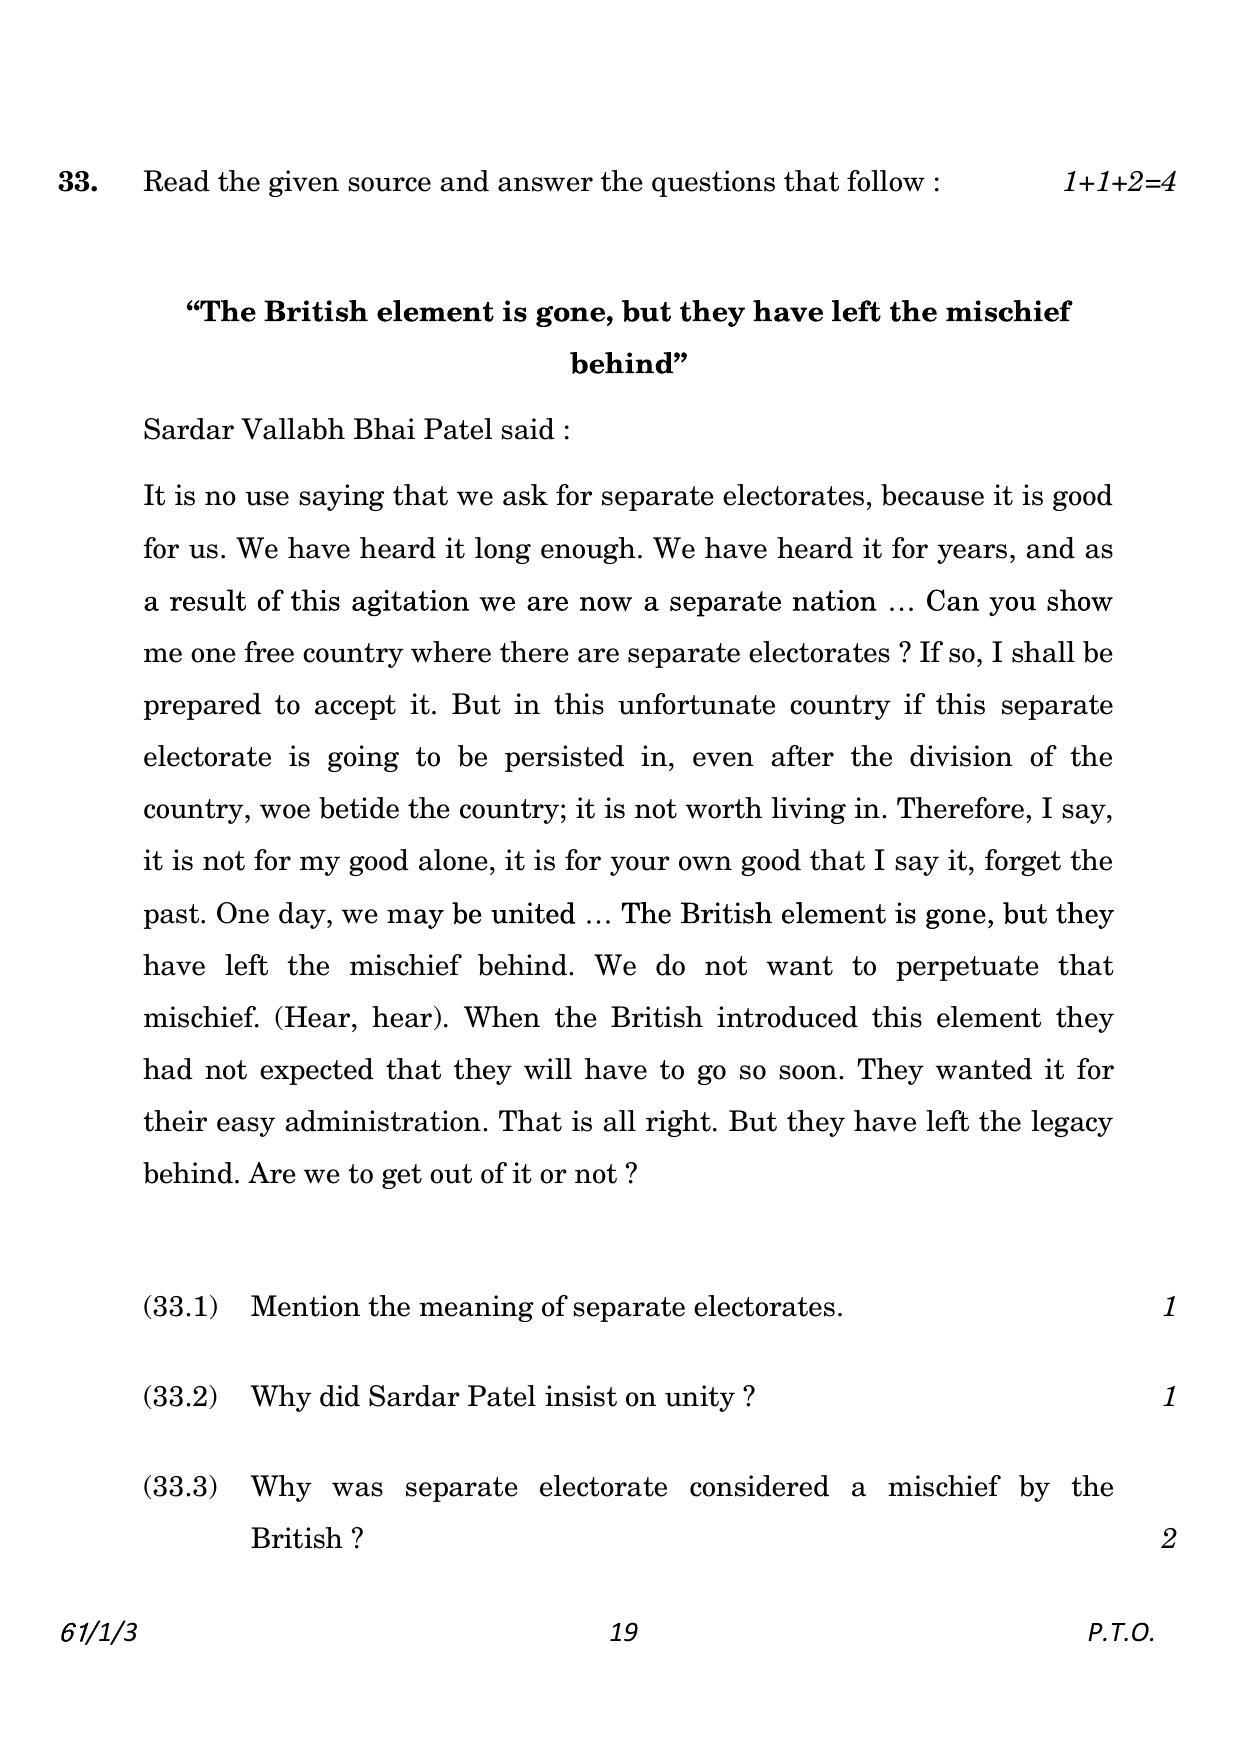 CBSE Class 12 61-1-3 History 2023 Question Paper - Page 19